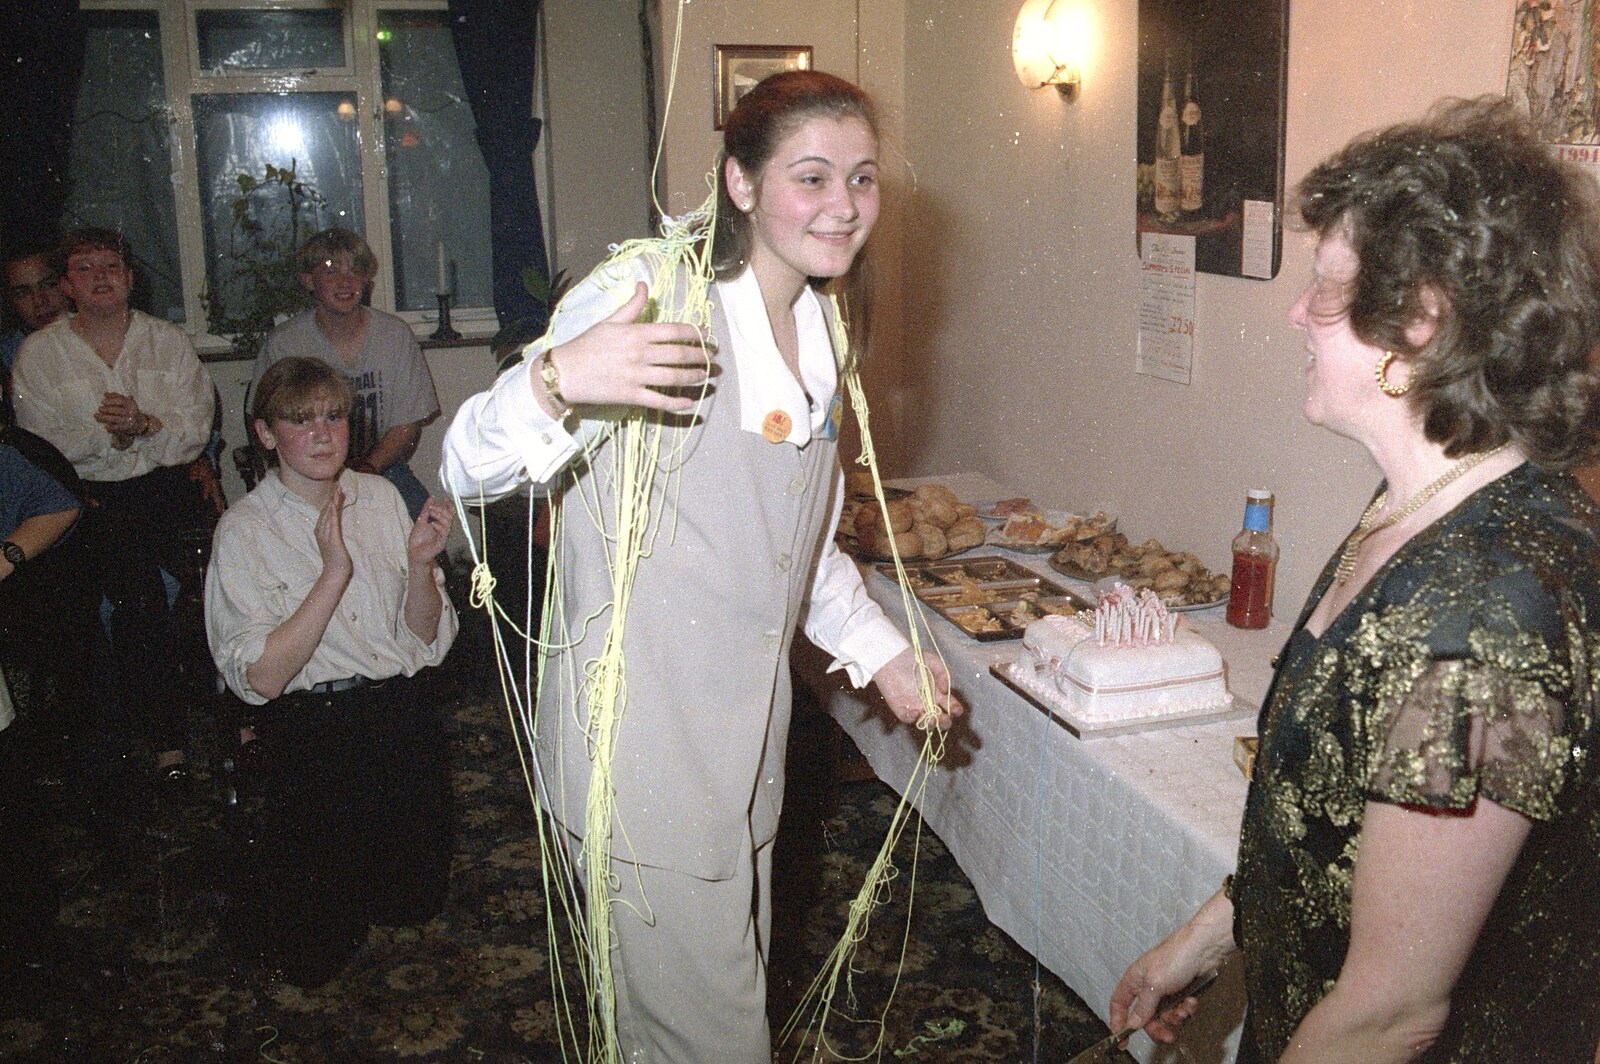 Claire gets covered in string from Claire's Eighteenth Birthday, The Swan Inn, Brome, Suffolk - 11th June 1994